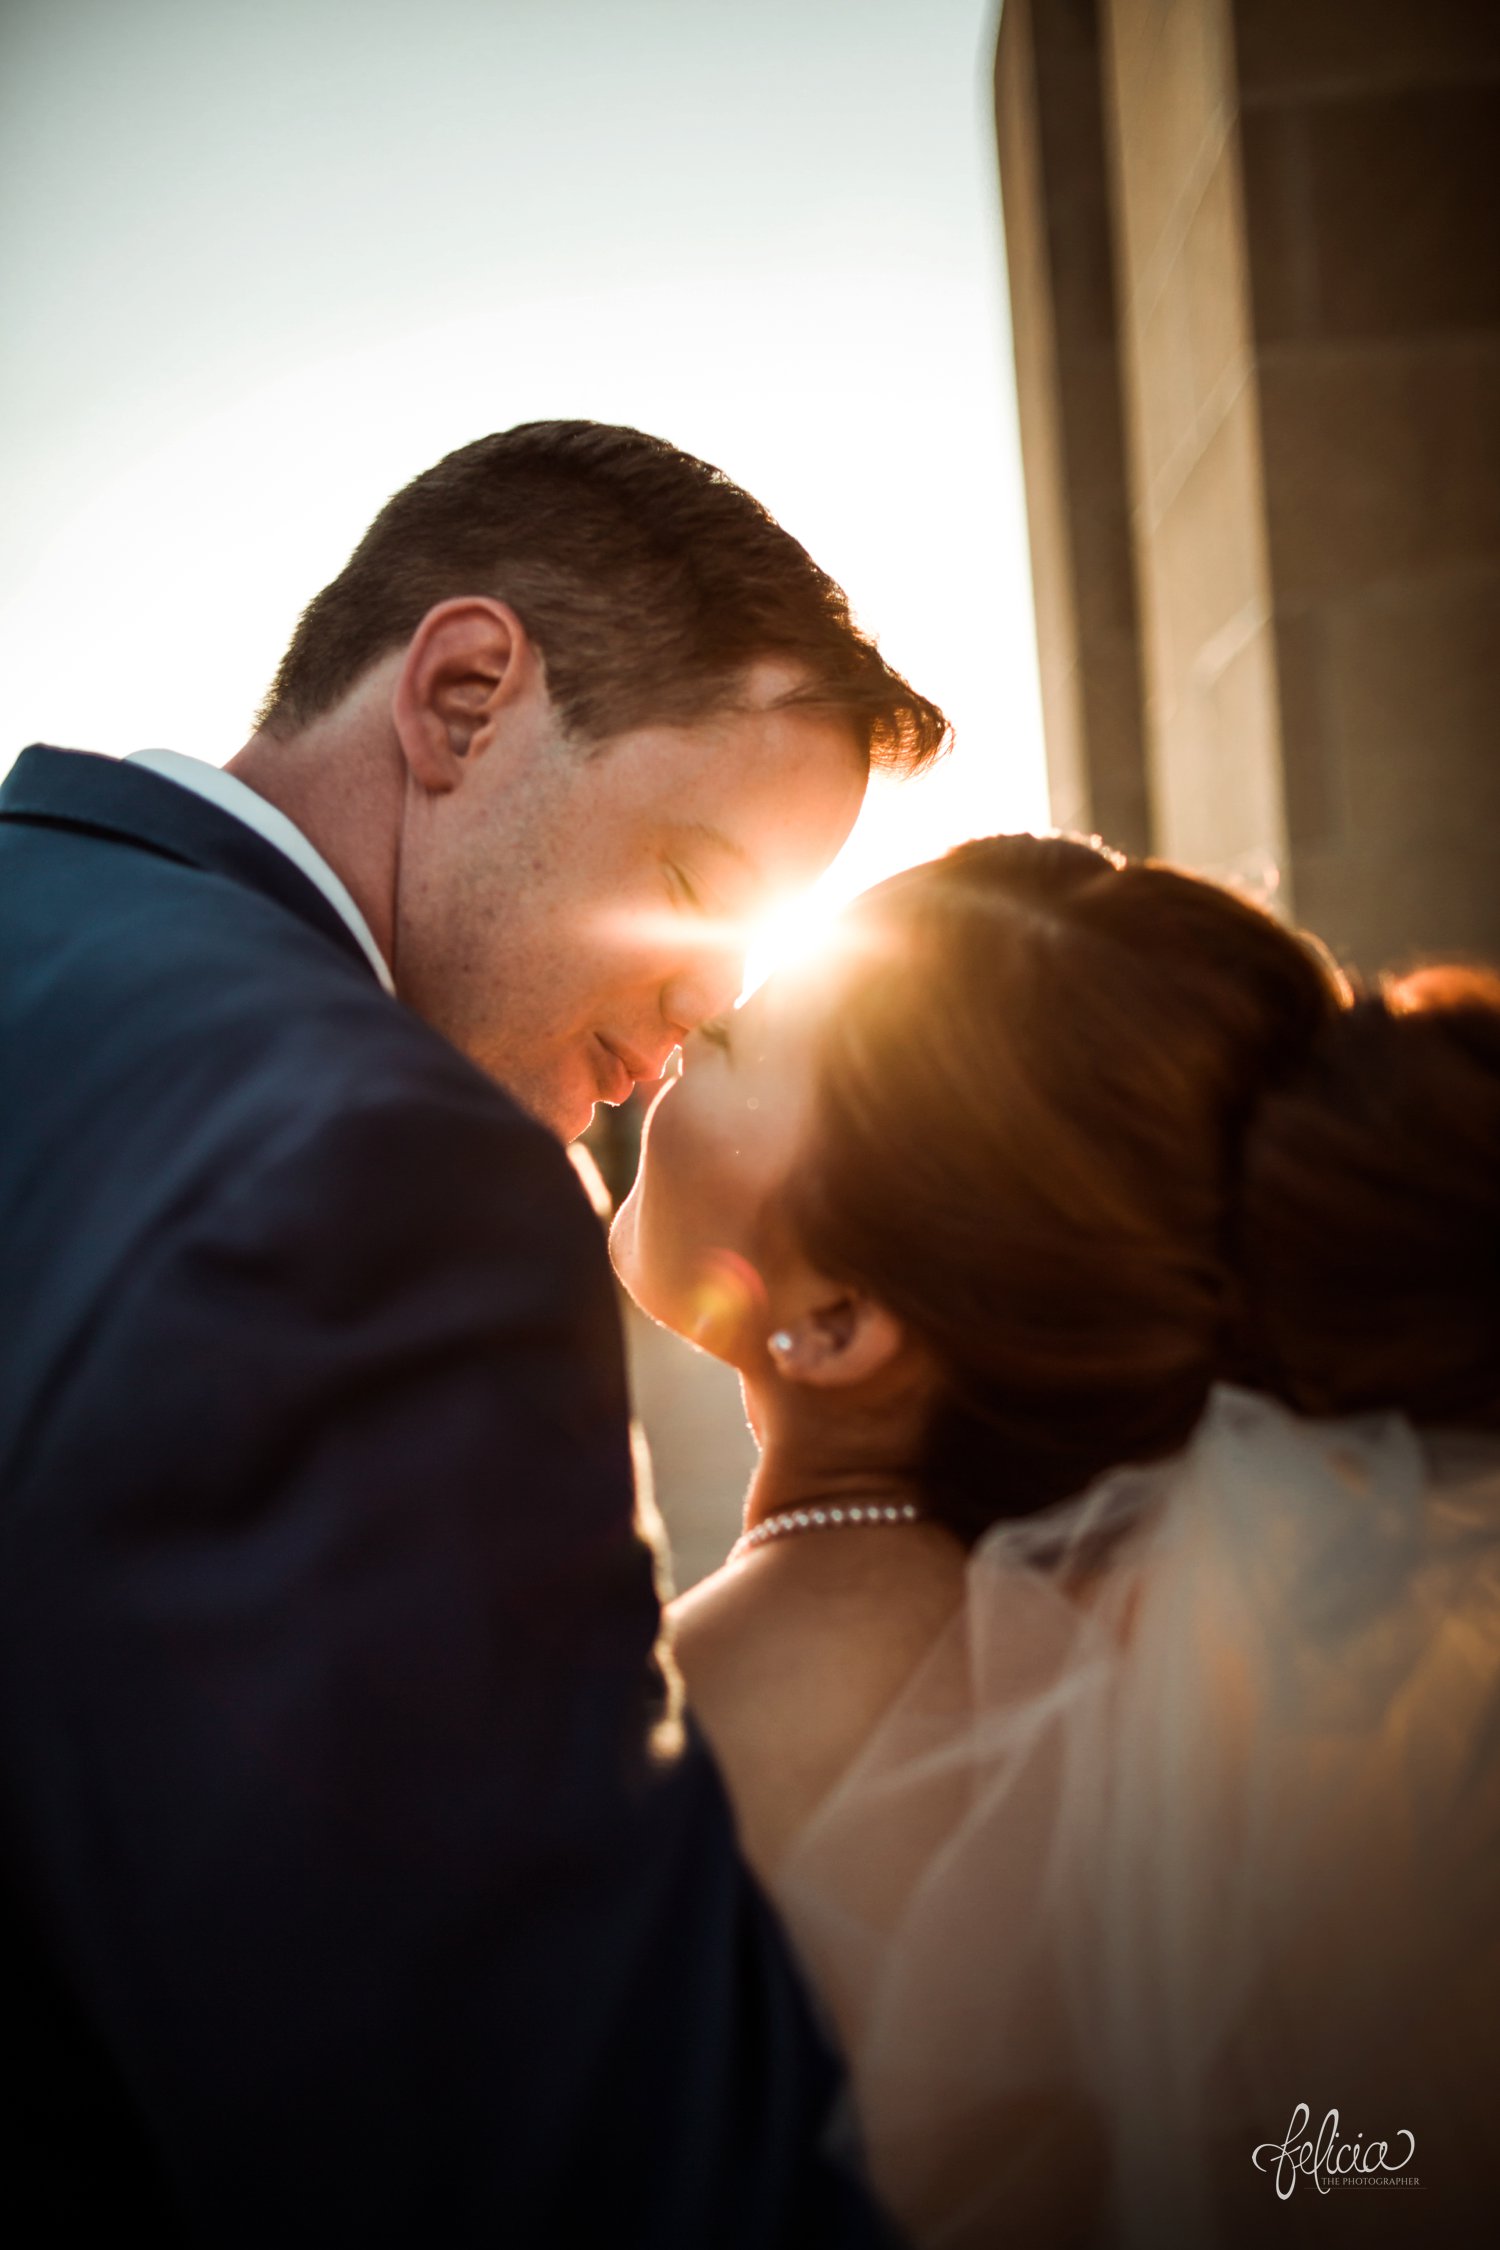 images by feliciathephotographer.com | destination wedding photographer | the grand hall at power and light | kansas city | missouri | downtown | glamorous | multicultural | rooftop | golden hour | sunset | pearls | romantic | couple portrait | 